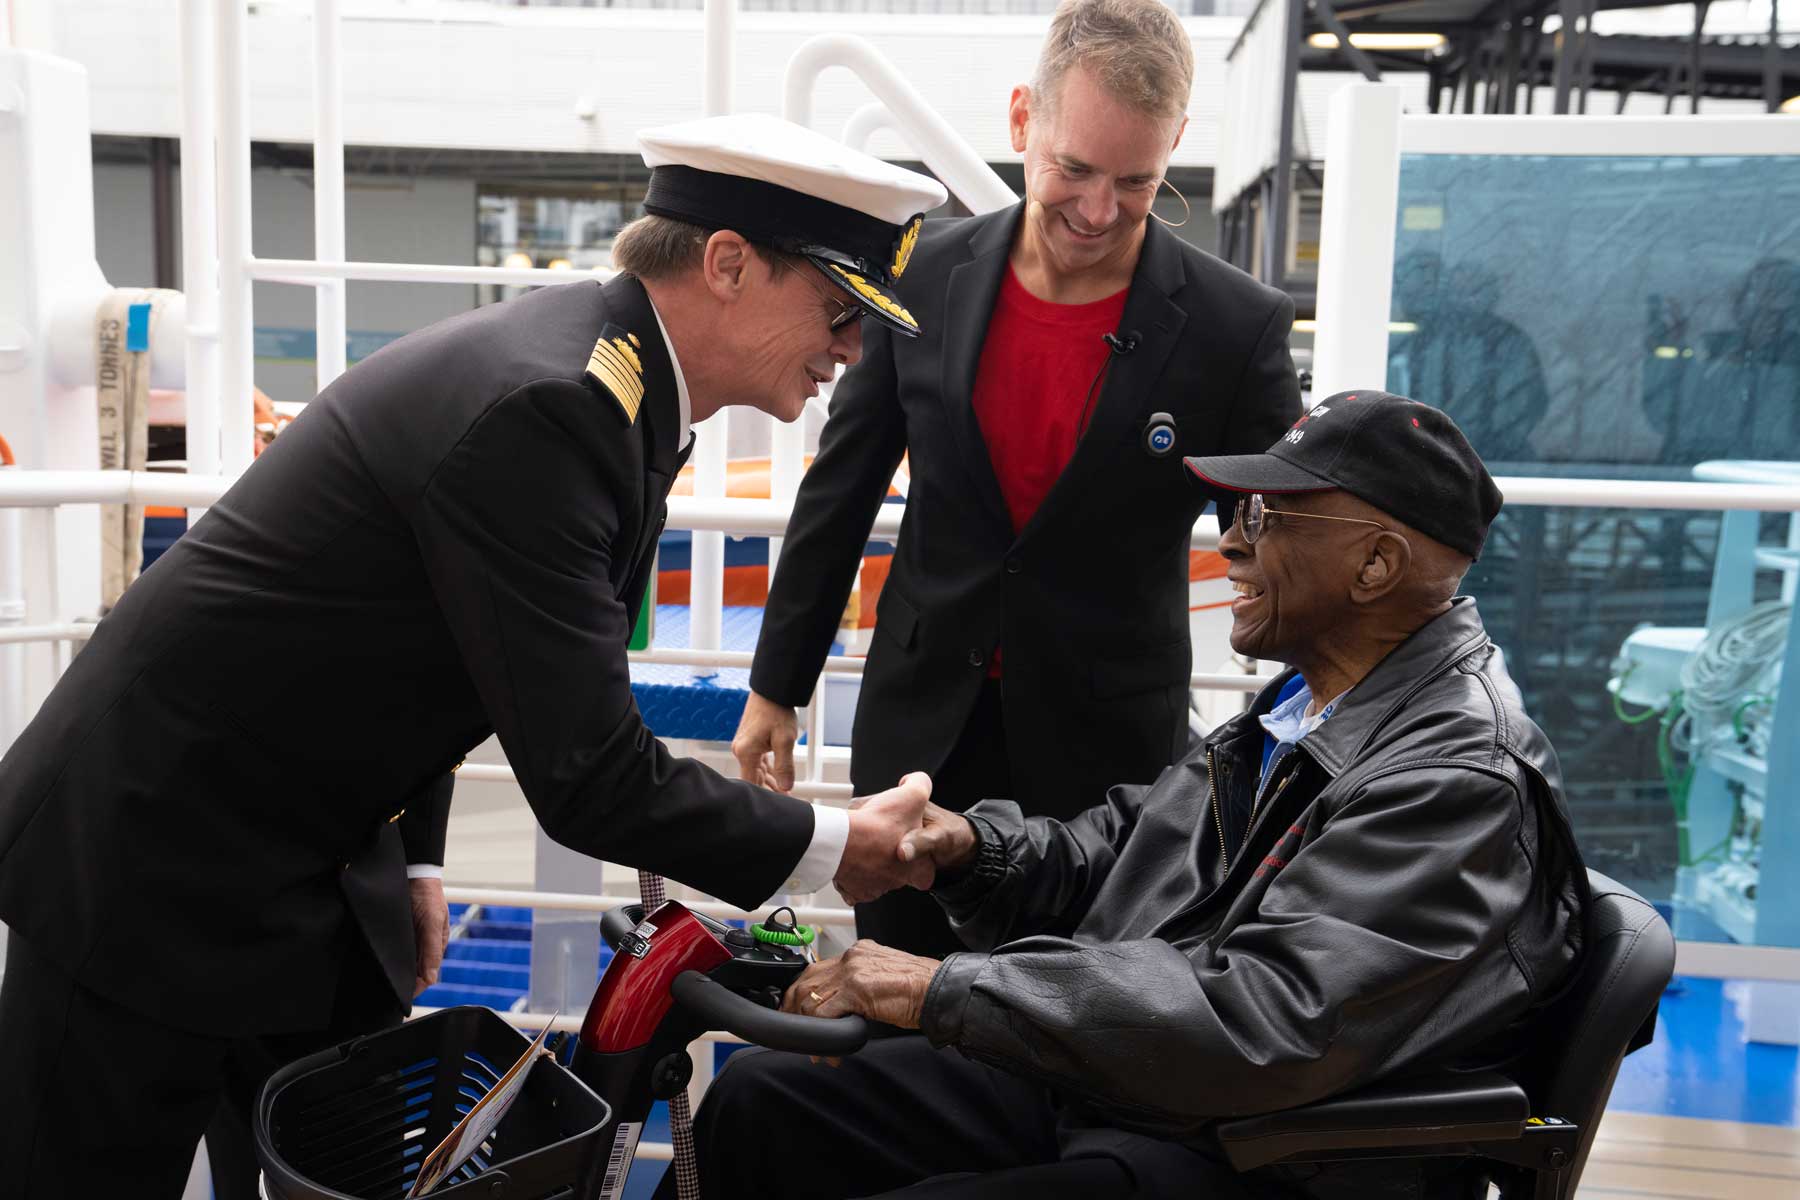 During the voyage, James Harvey will share insights from his storied service and remarkable life experiences with other guests as part of an onboard discussion.